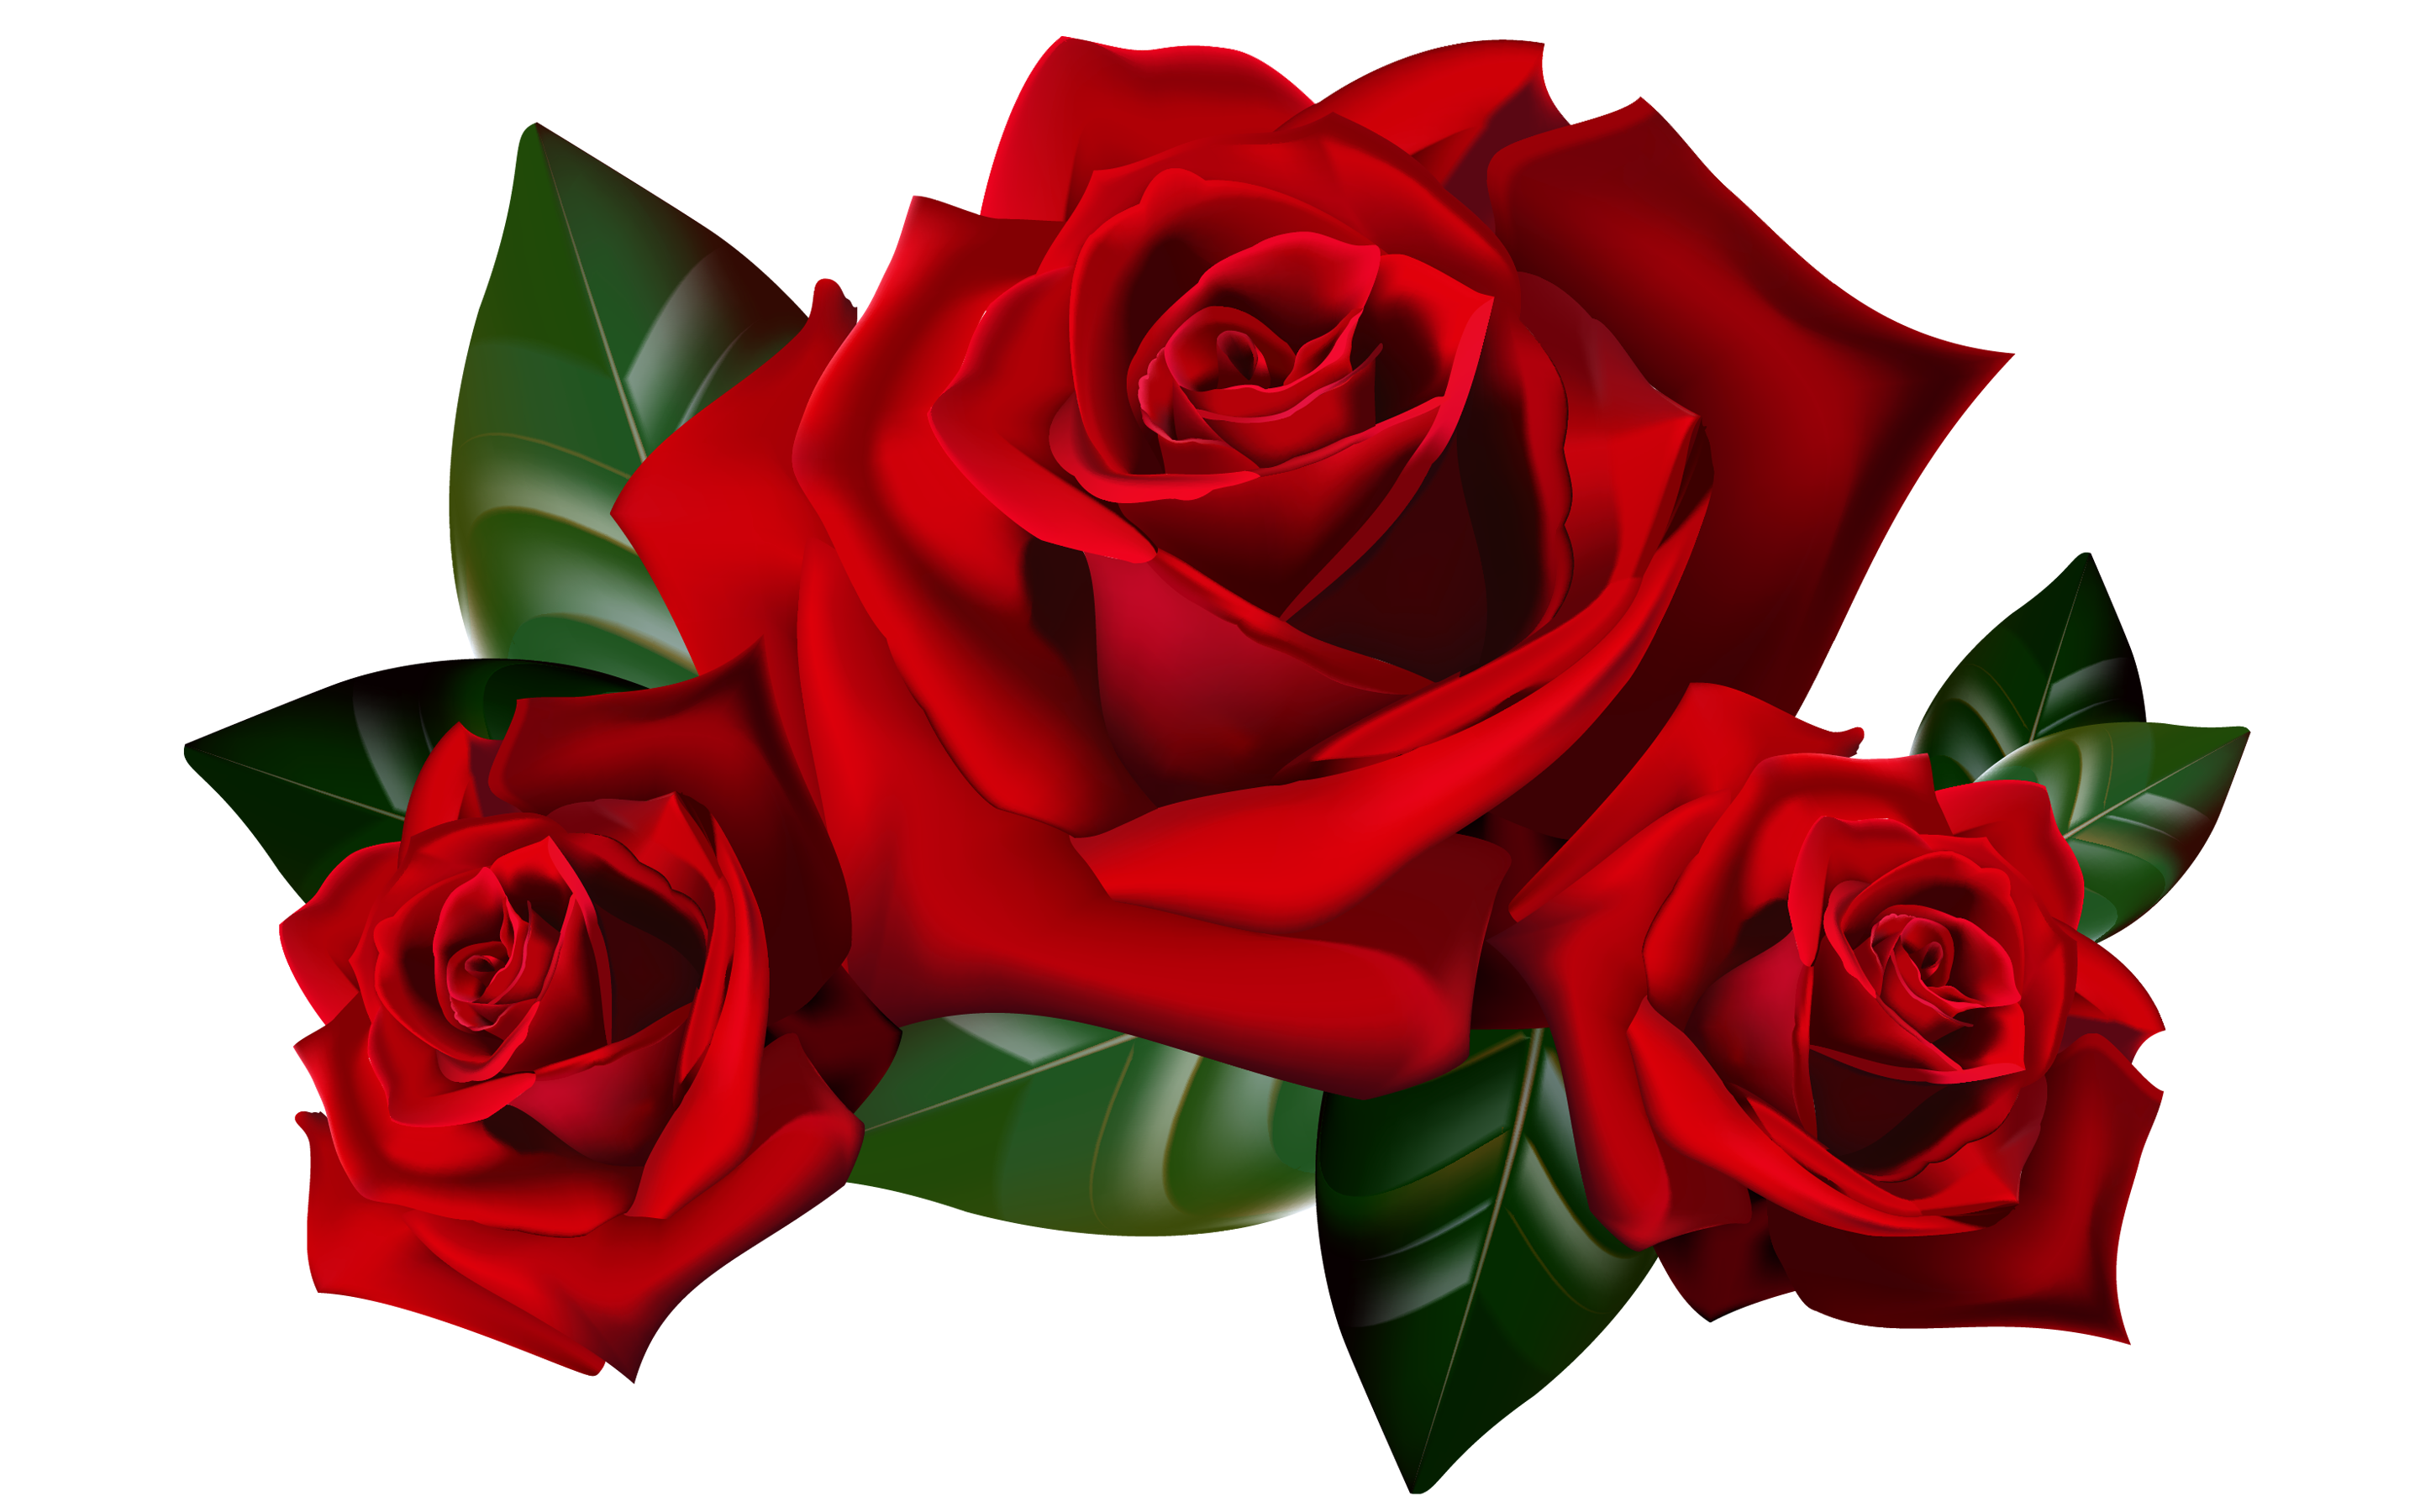 Red Roses Png Clipart Picture Hd Desktop Wallpaper Widescreen ...